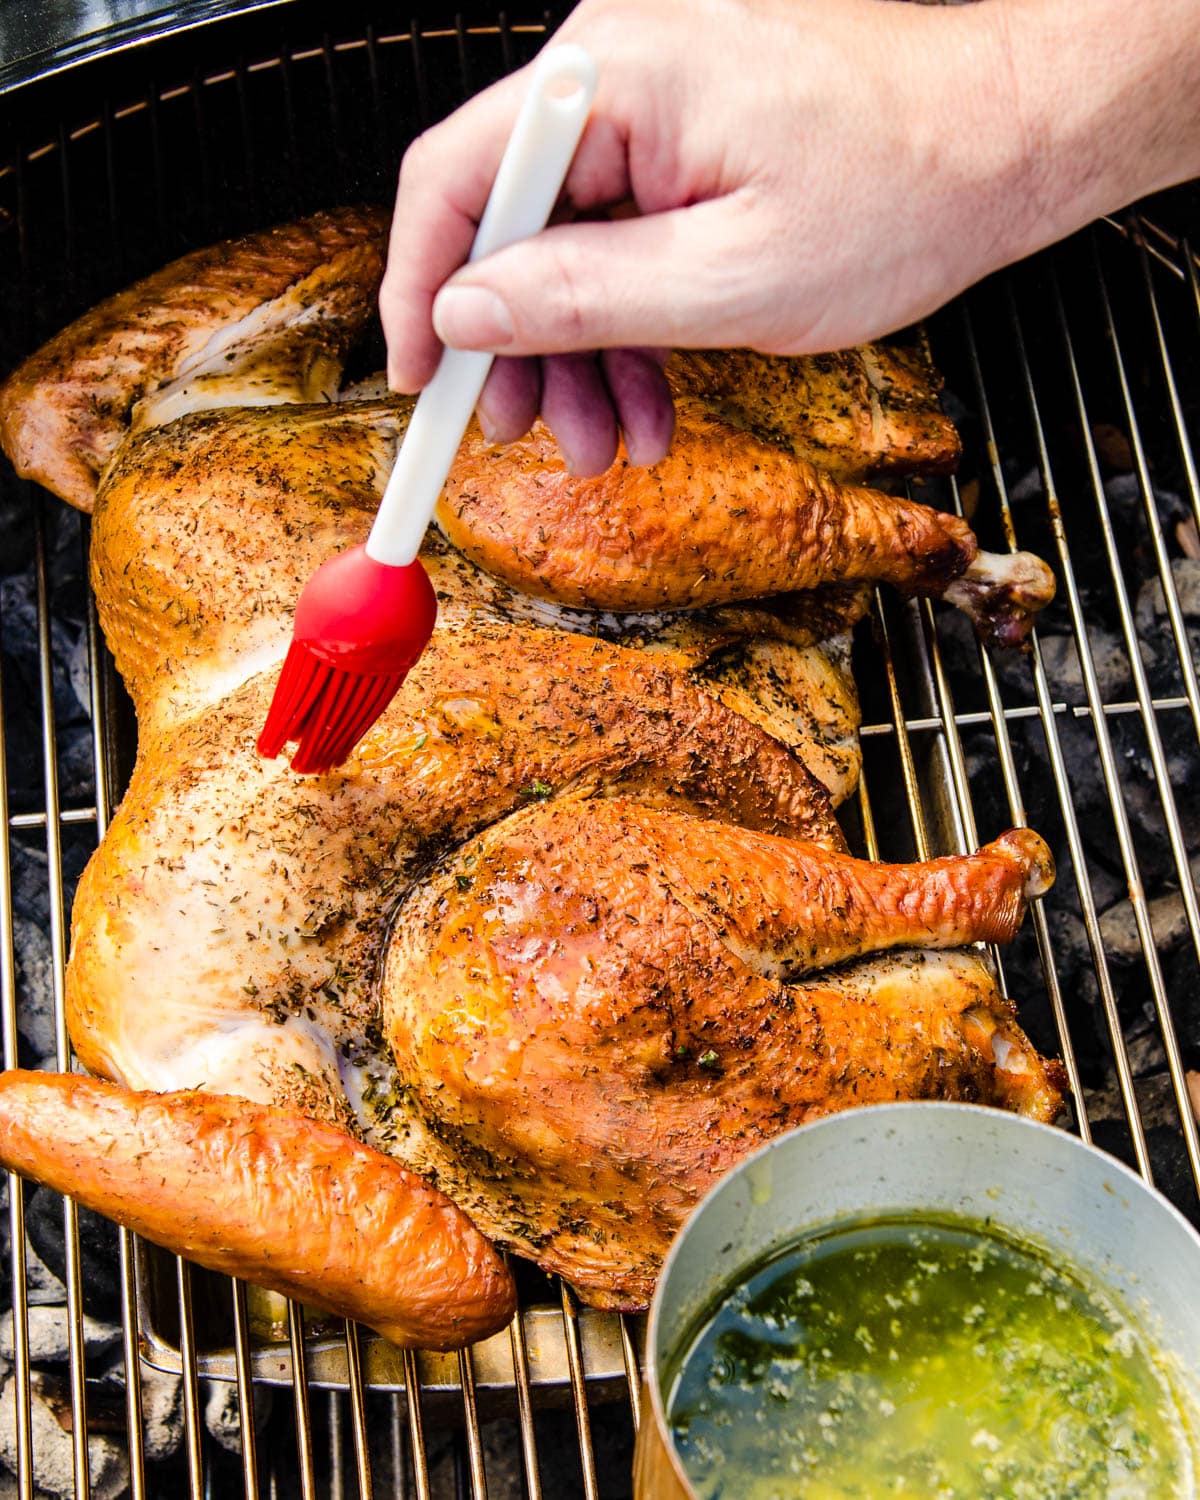 Basting the turkey with herb butter.